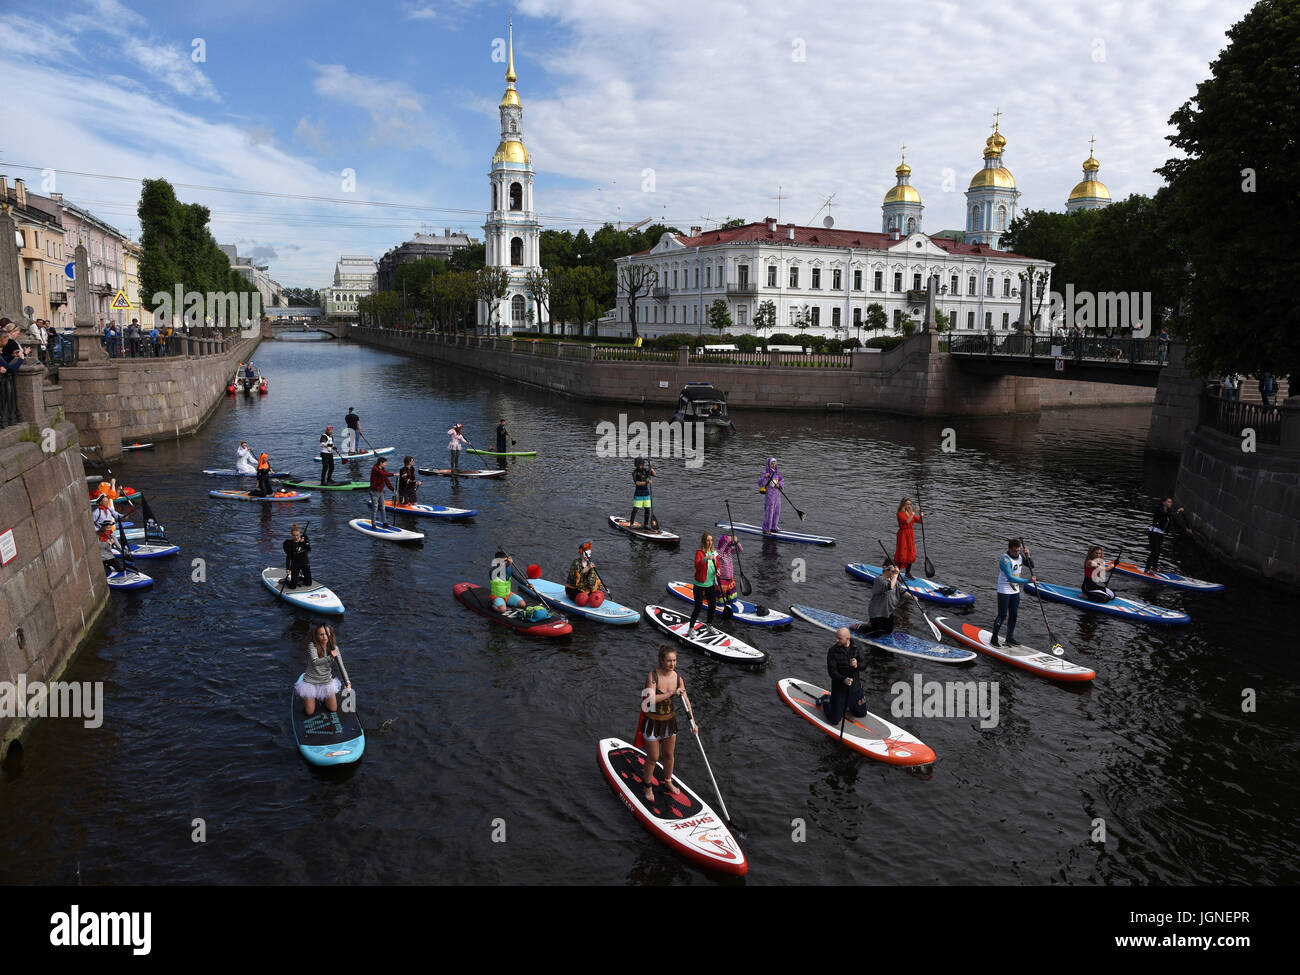 St. Petersburg, Russia. 8th July, 2017. Russia, St. Petersburg, on July 8, 2017. St. Petersburg International sea festival 2017. Participants of a festival of SUP surfing on the Fontanka River, during the fancy-dress race on surfboards. More than 300 athletes and fans of driving on boards with an oar have participated in a festival. Total length of a distance will make about 10 kilometers. Credit: Andrey Pronin/ZUMA Wire/Alamy Live News Stock Photo